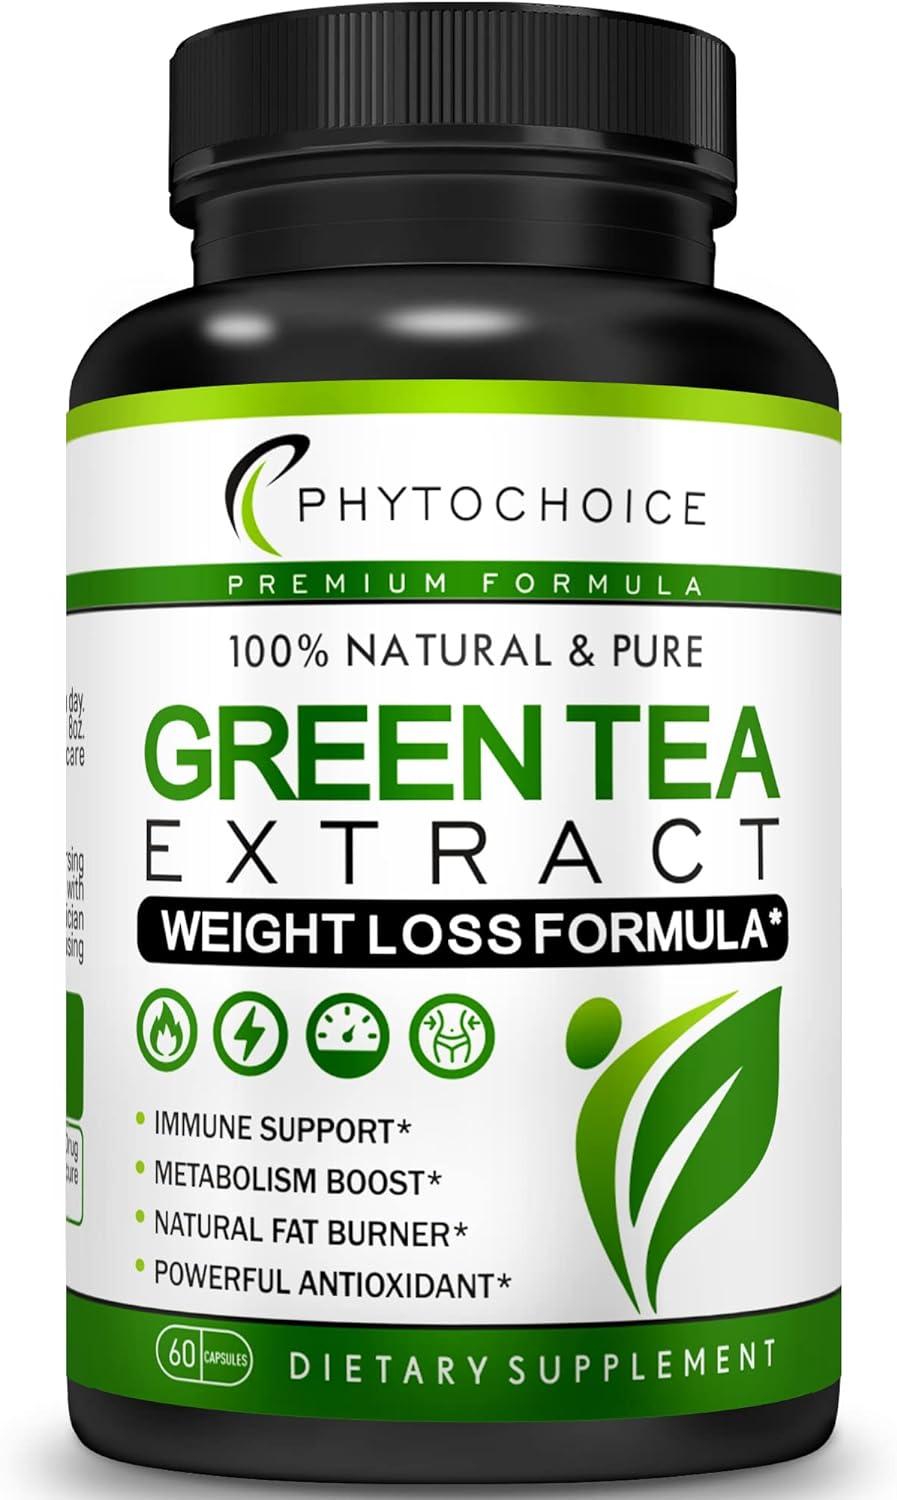 Green Tea Extract-Natural Appetite Suppressant for Weight Loss for Women and Men-Green Tea Fat Burner Pills-Diet Pills That Work to Help Lose Weight Fast -Stomach Belly Fat Burning Capsules